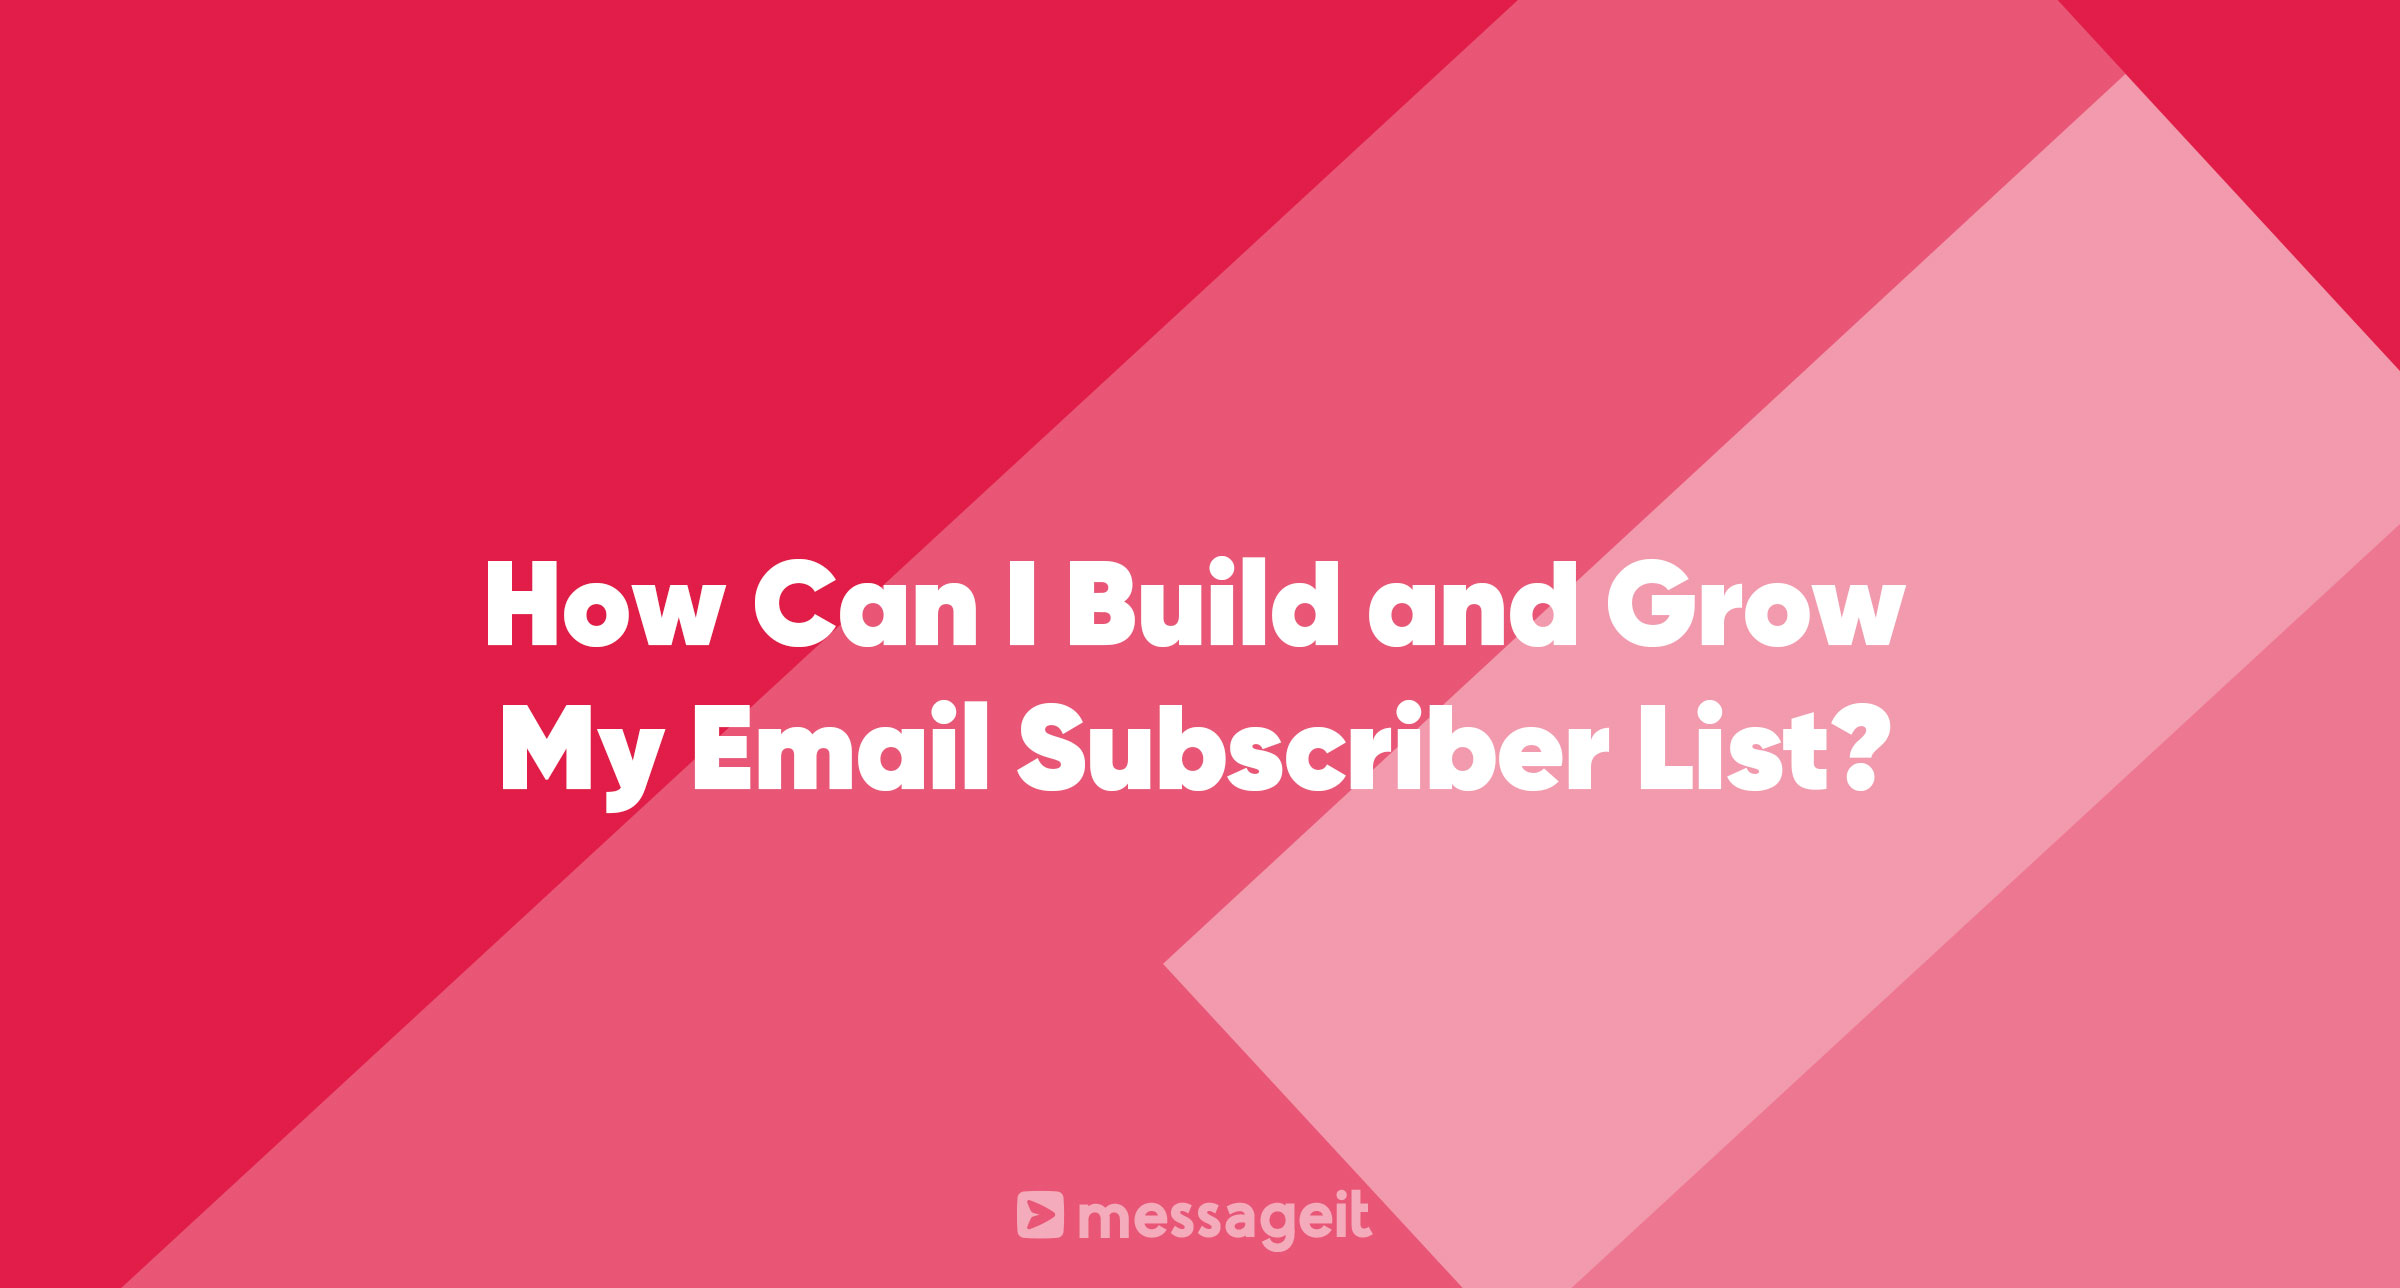 Article | How Can I Build and Grow My Email Subscriber List?